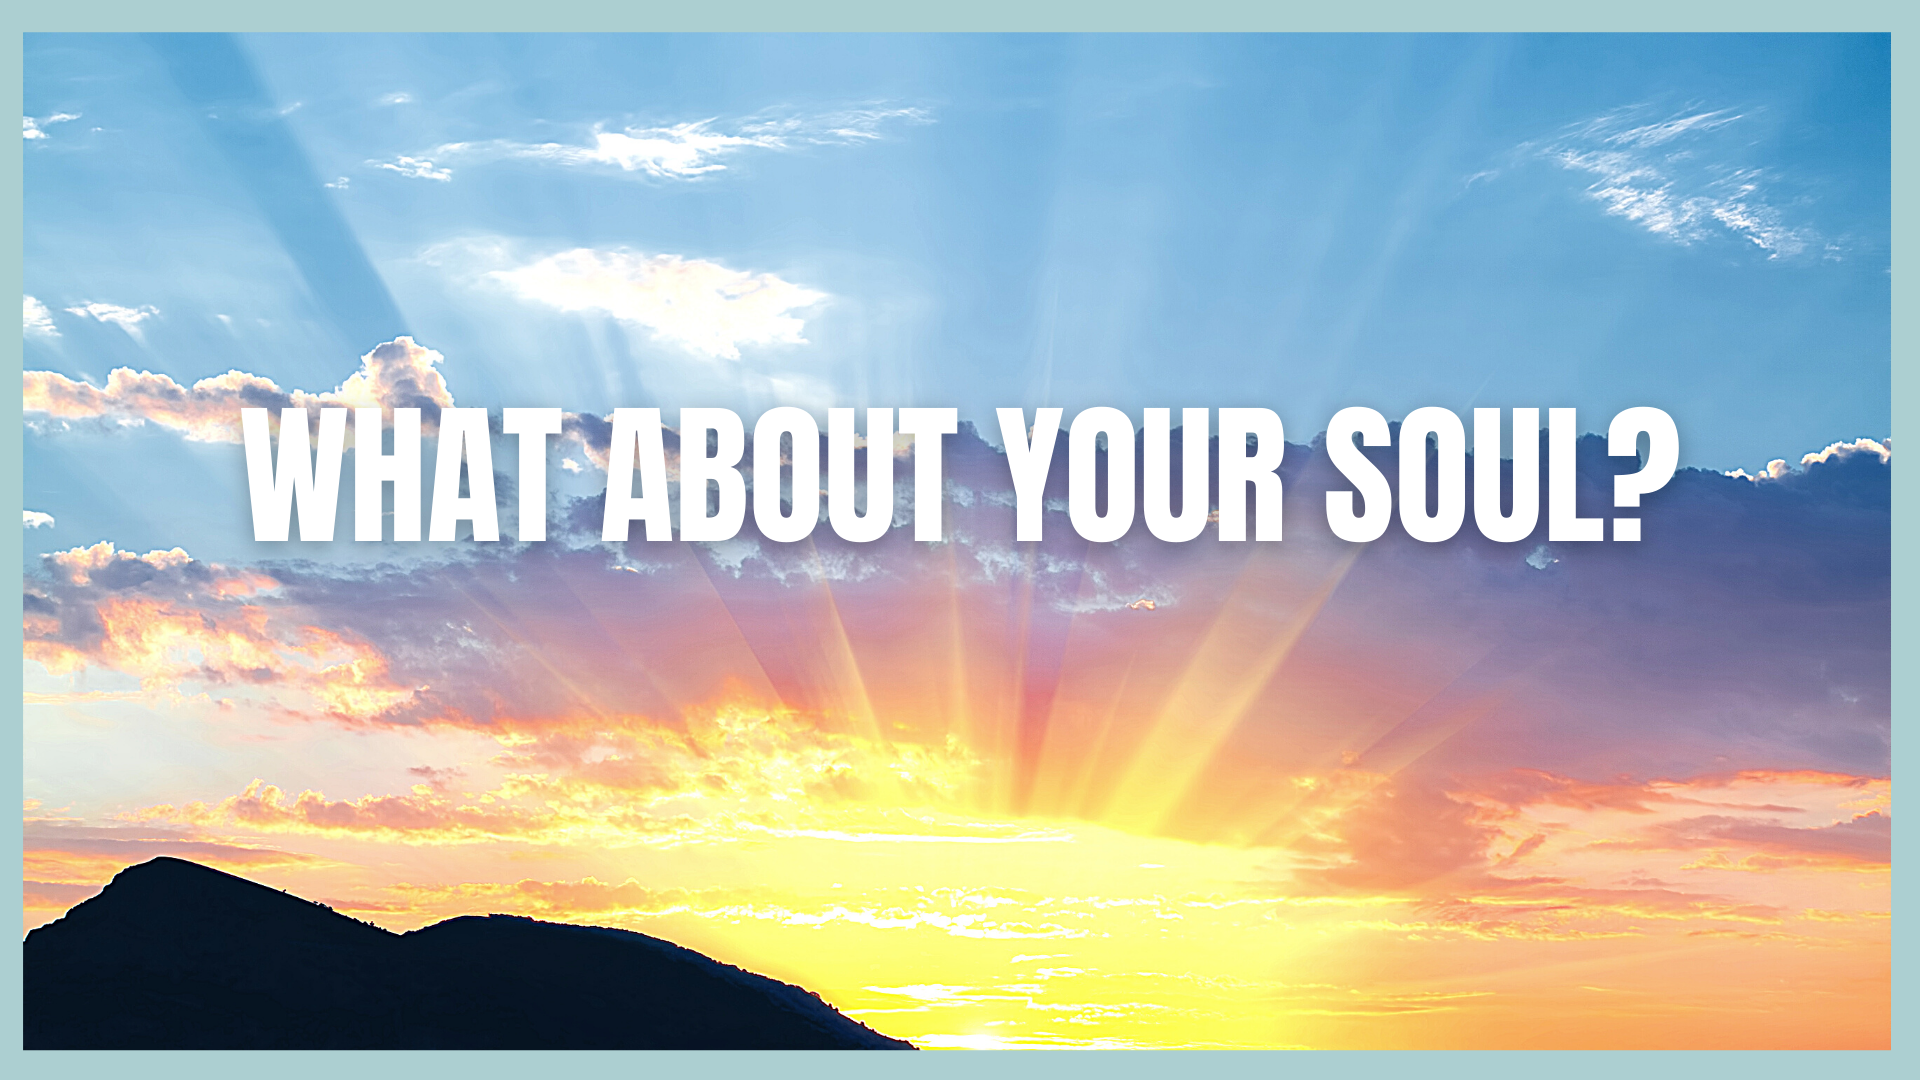 What About Your Soul?